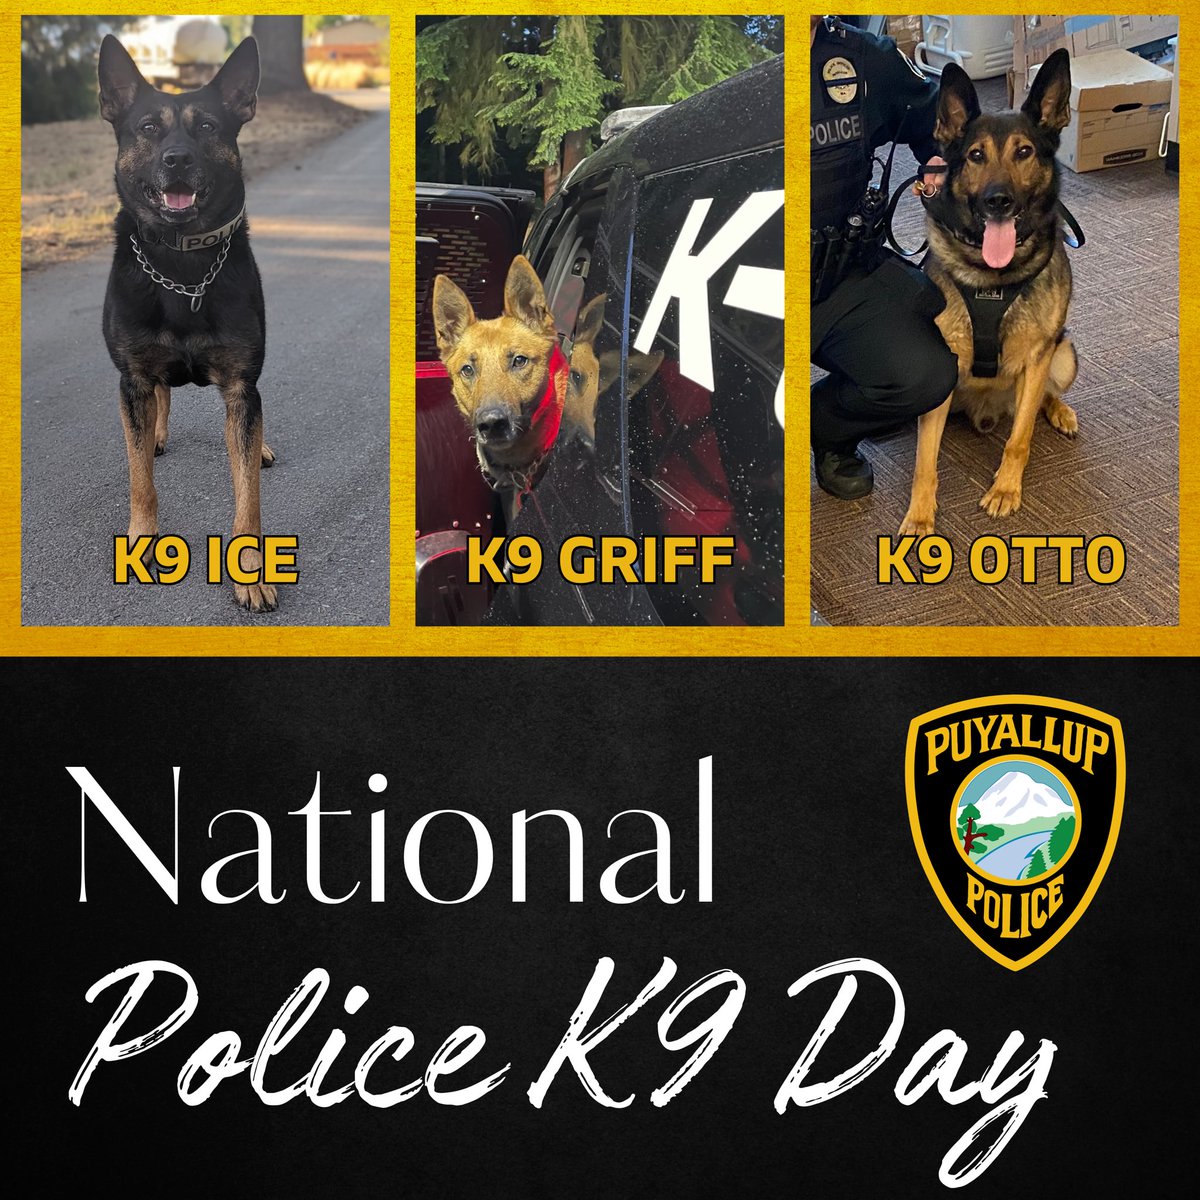 Today is National Police K9 Day! We are so thankful to have three dedicated, hardworking, and ADORABLE K9 Units on Team PPD. We love you Ice, Griff, and Otto! #NationalPoliceK9Day